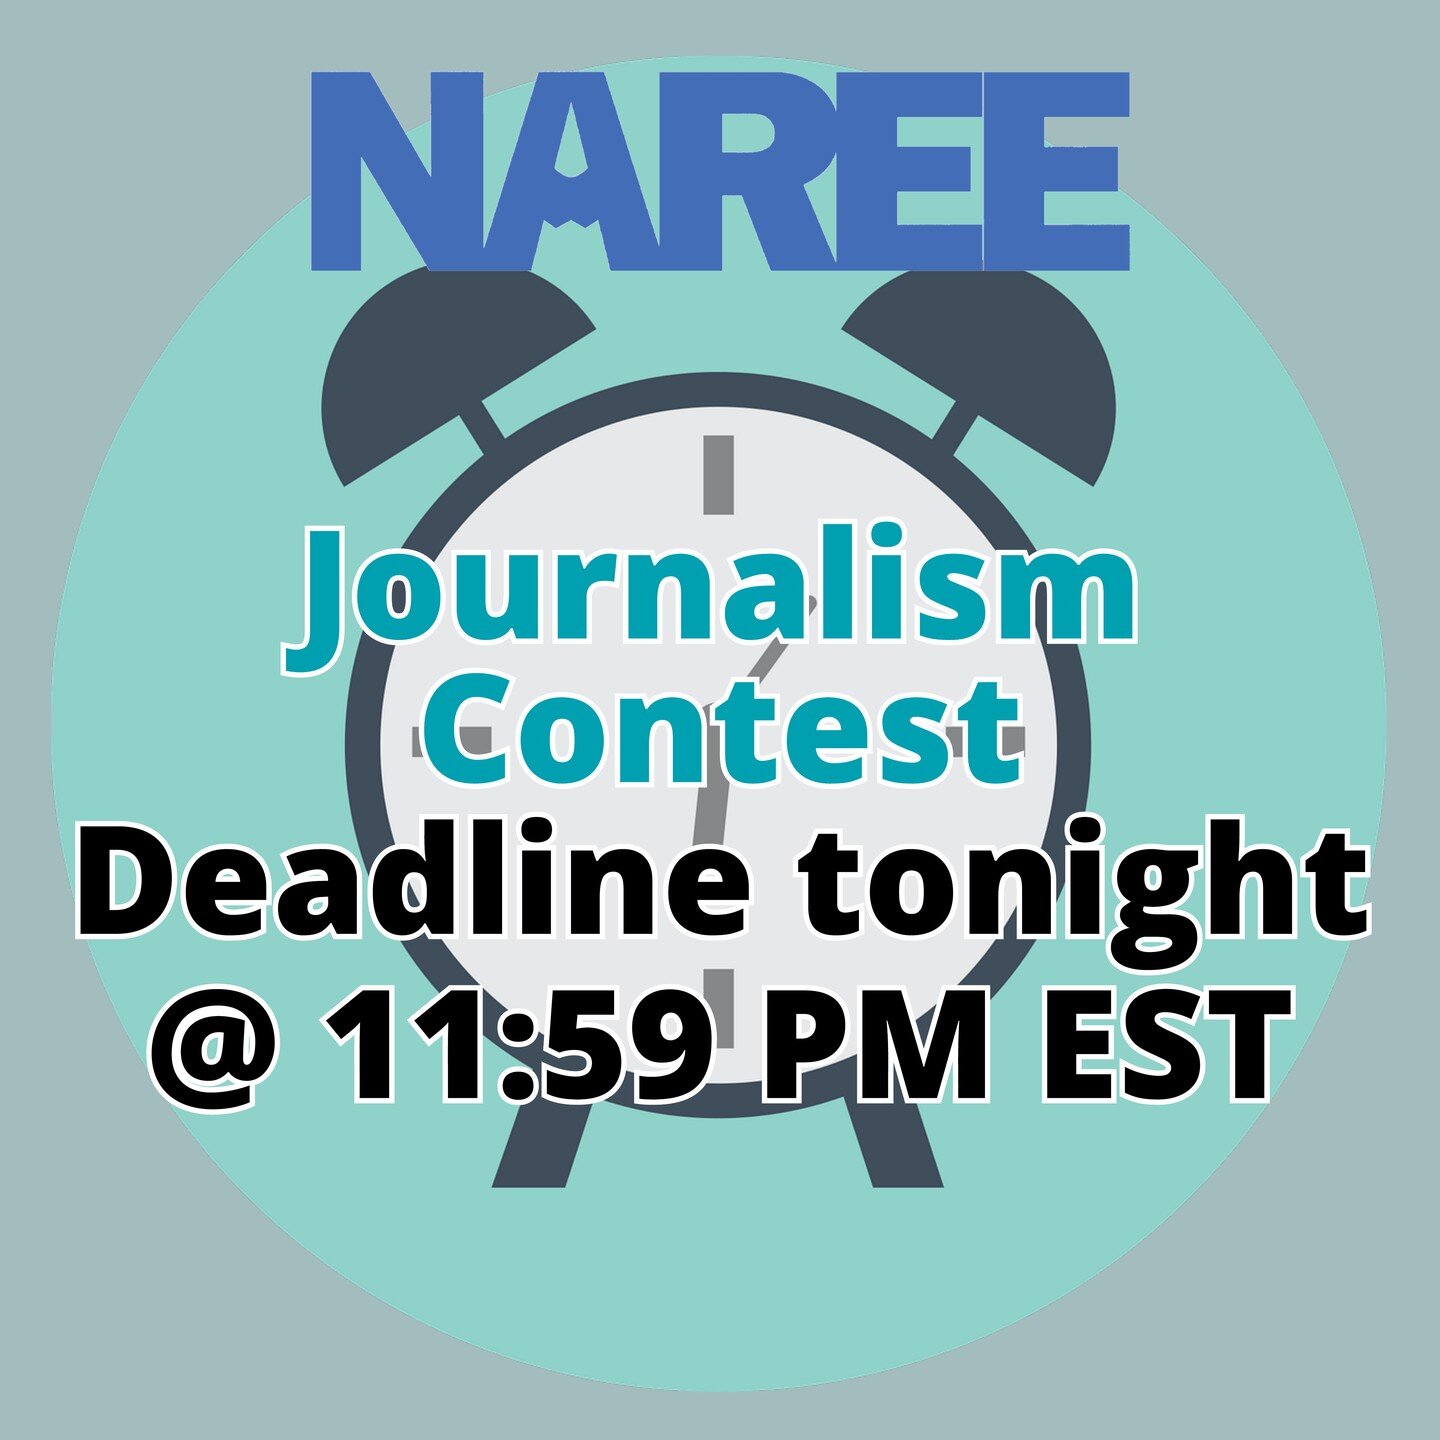 Tonight @ 11:59 PM EST is the deadline to enter NAREE's Real Estate Journalism Competition. Go to naree.org/jcontest to win the $1,000 Harney Award for watchdog reporting; $1,000 for Best Single Bylined Story; $500 for Best Freelance Collection. In a